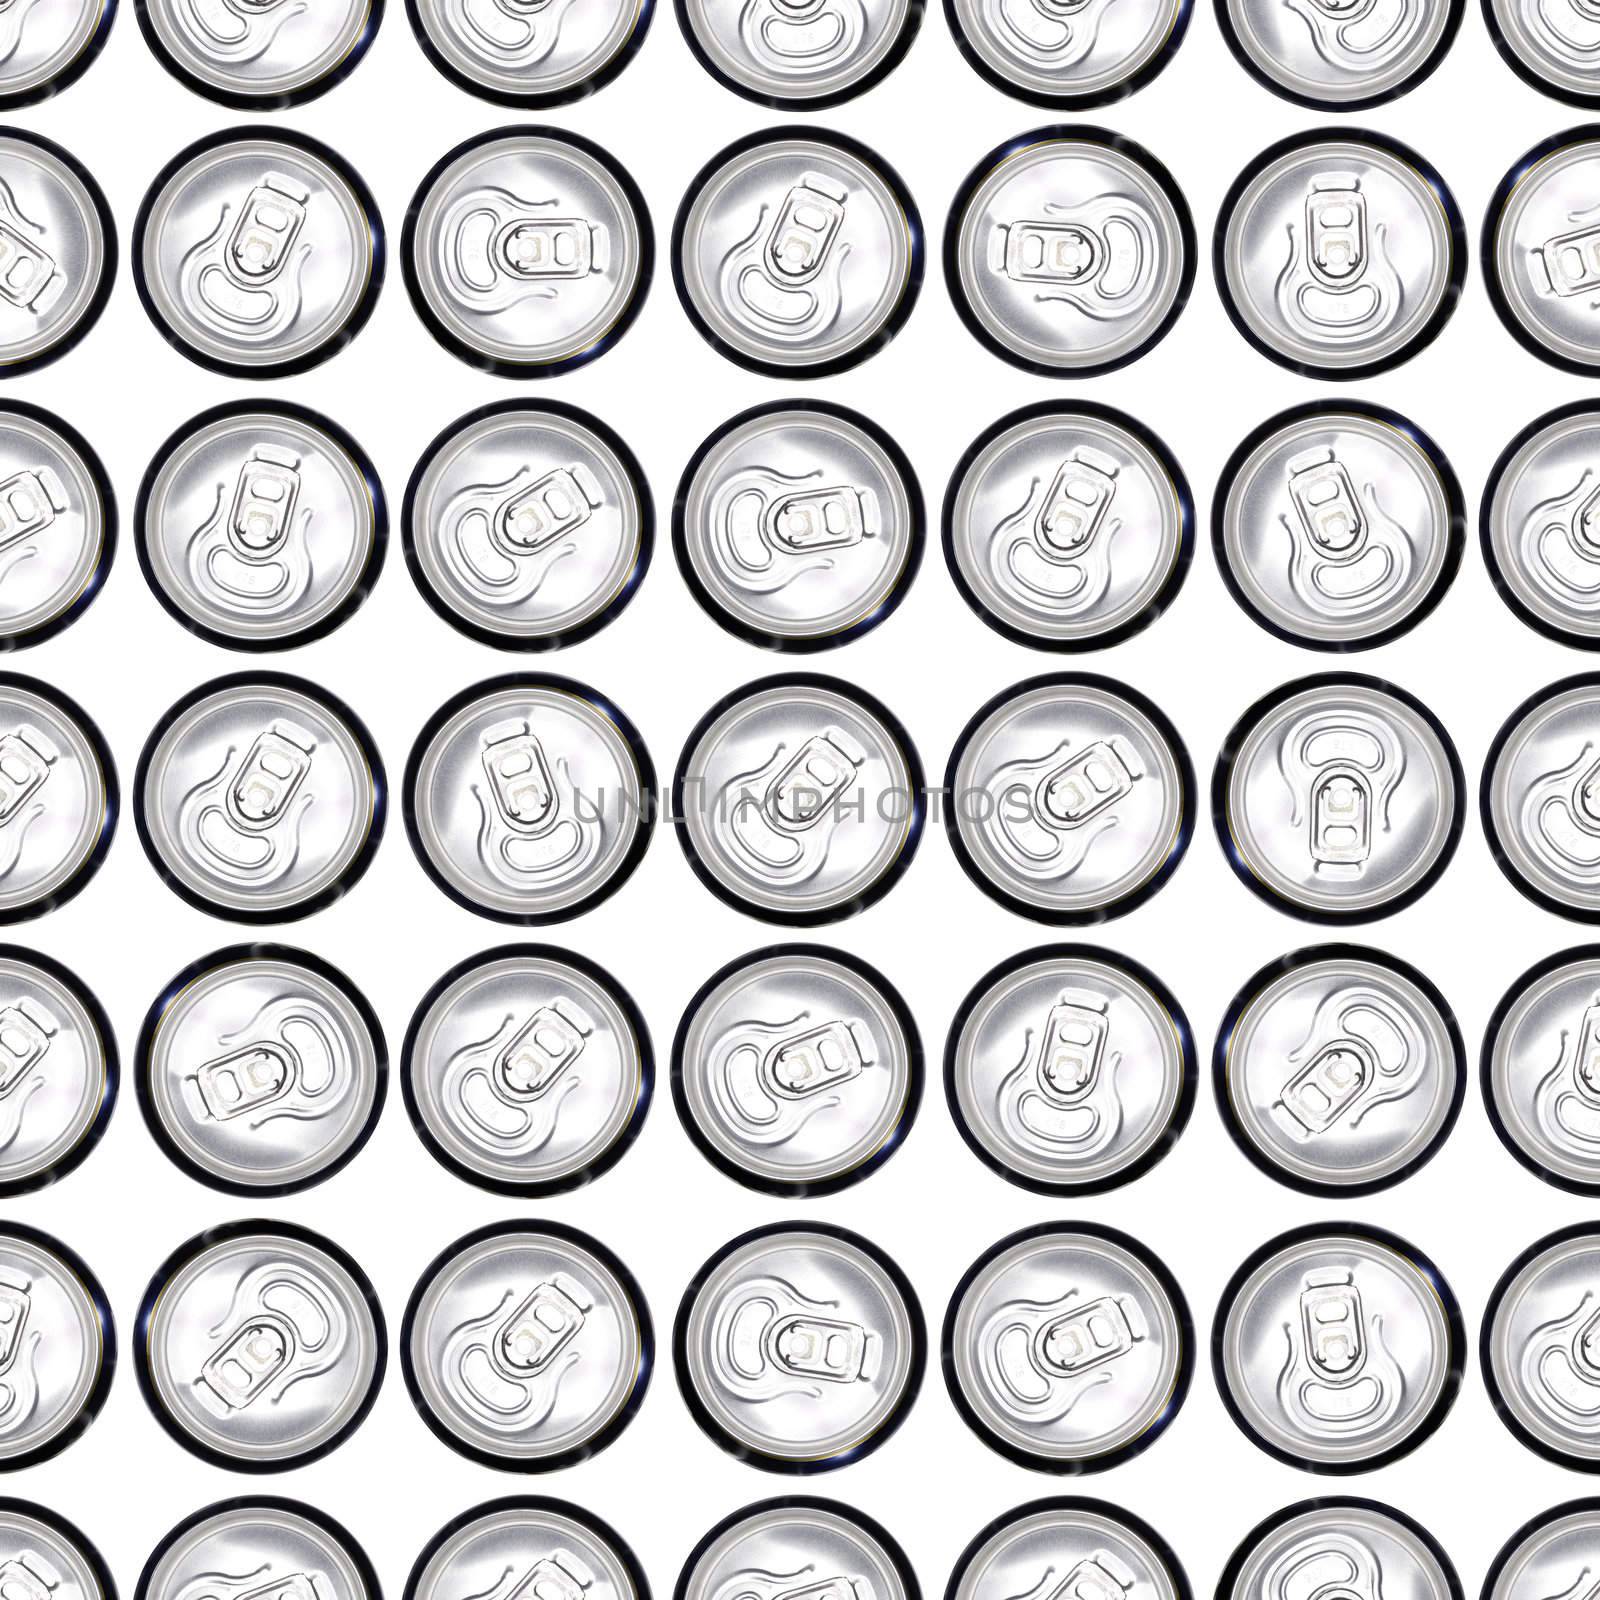 Cans in a pattern